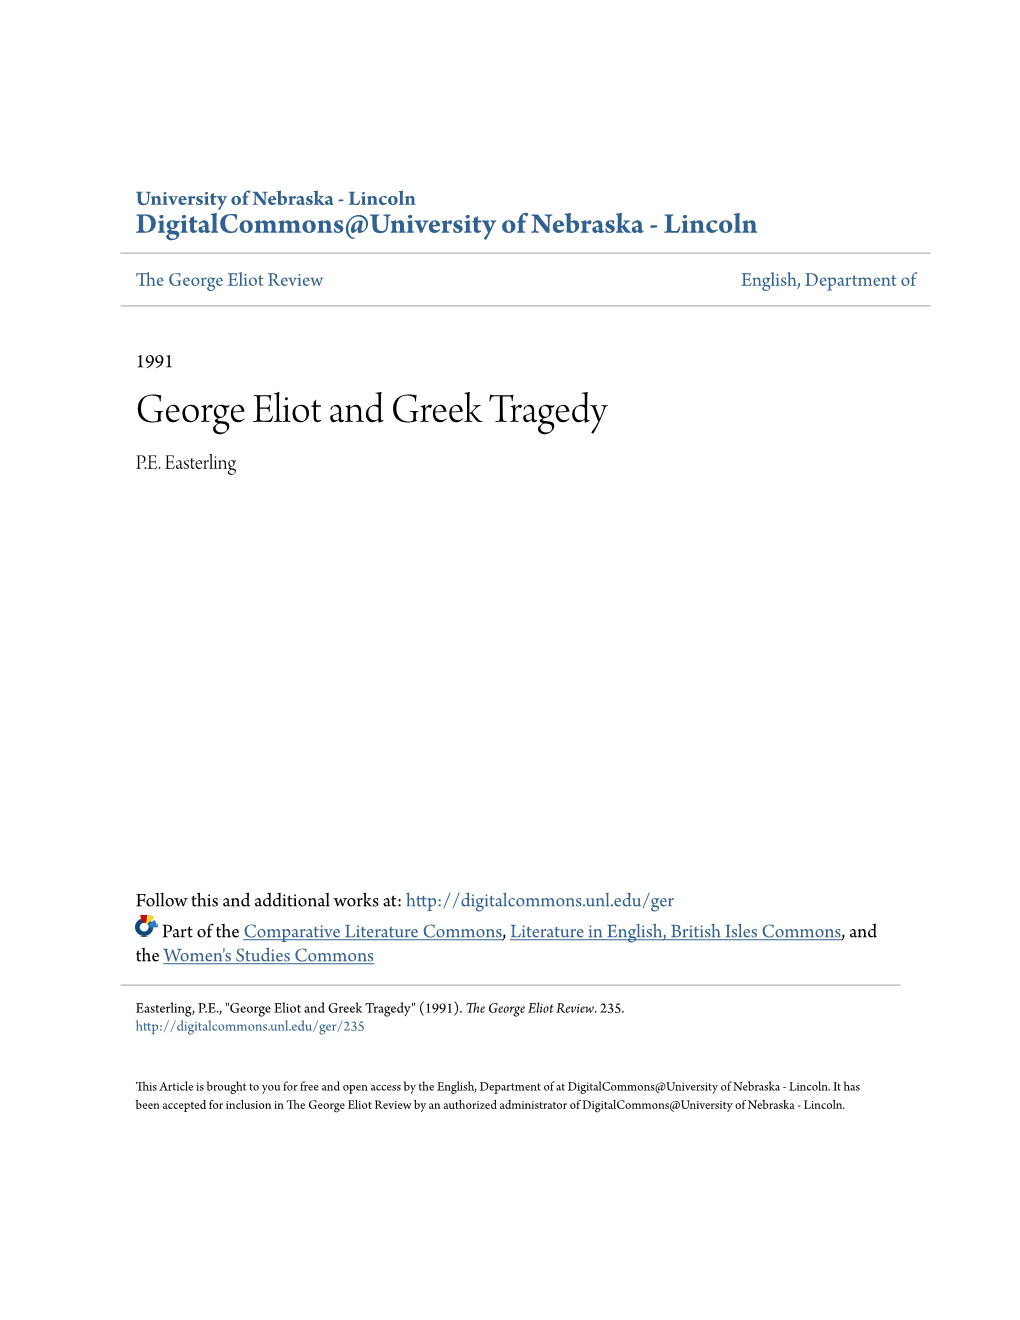 George Eliot and Greek Tragedy P.E